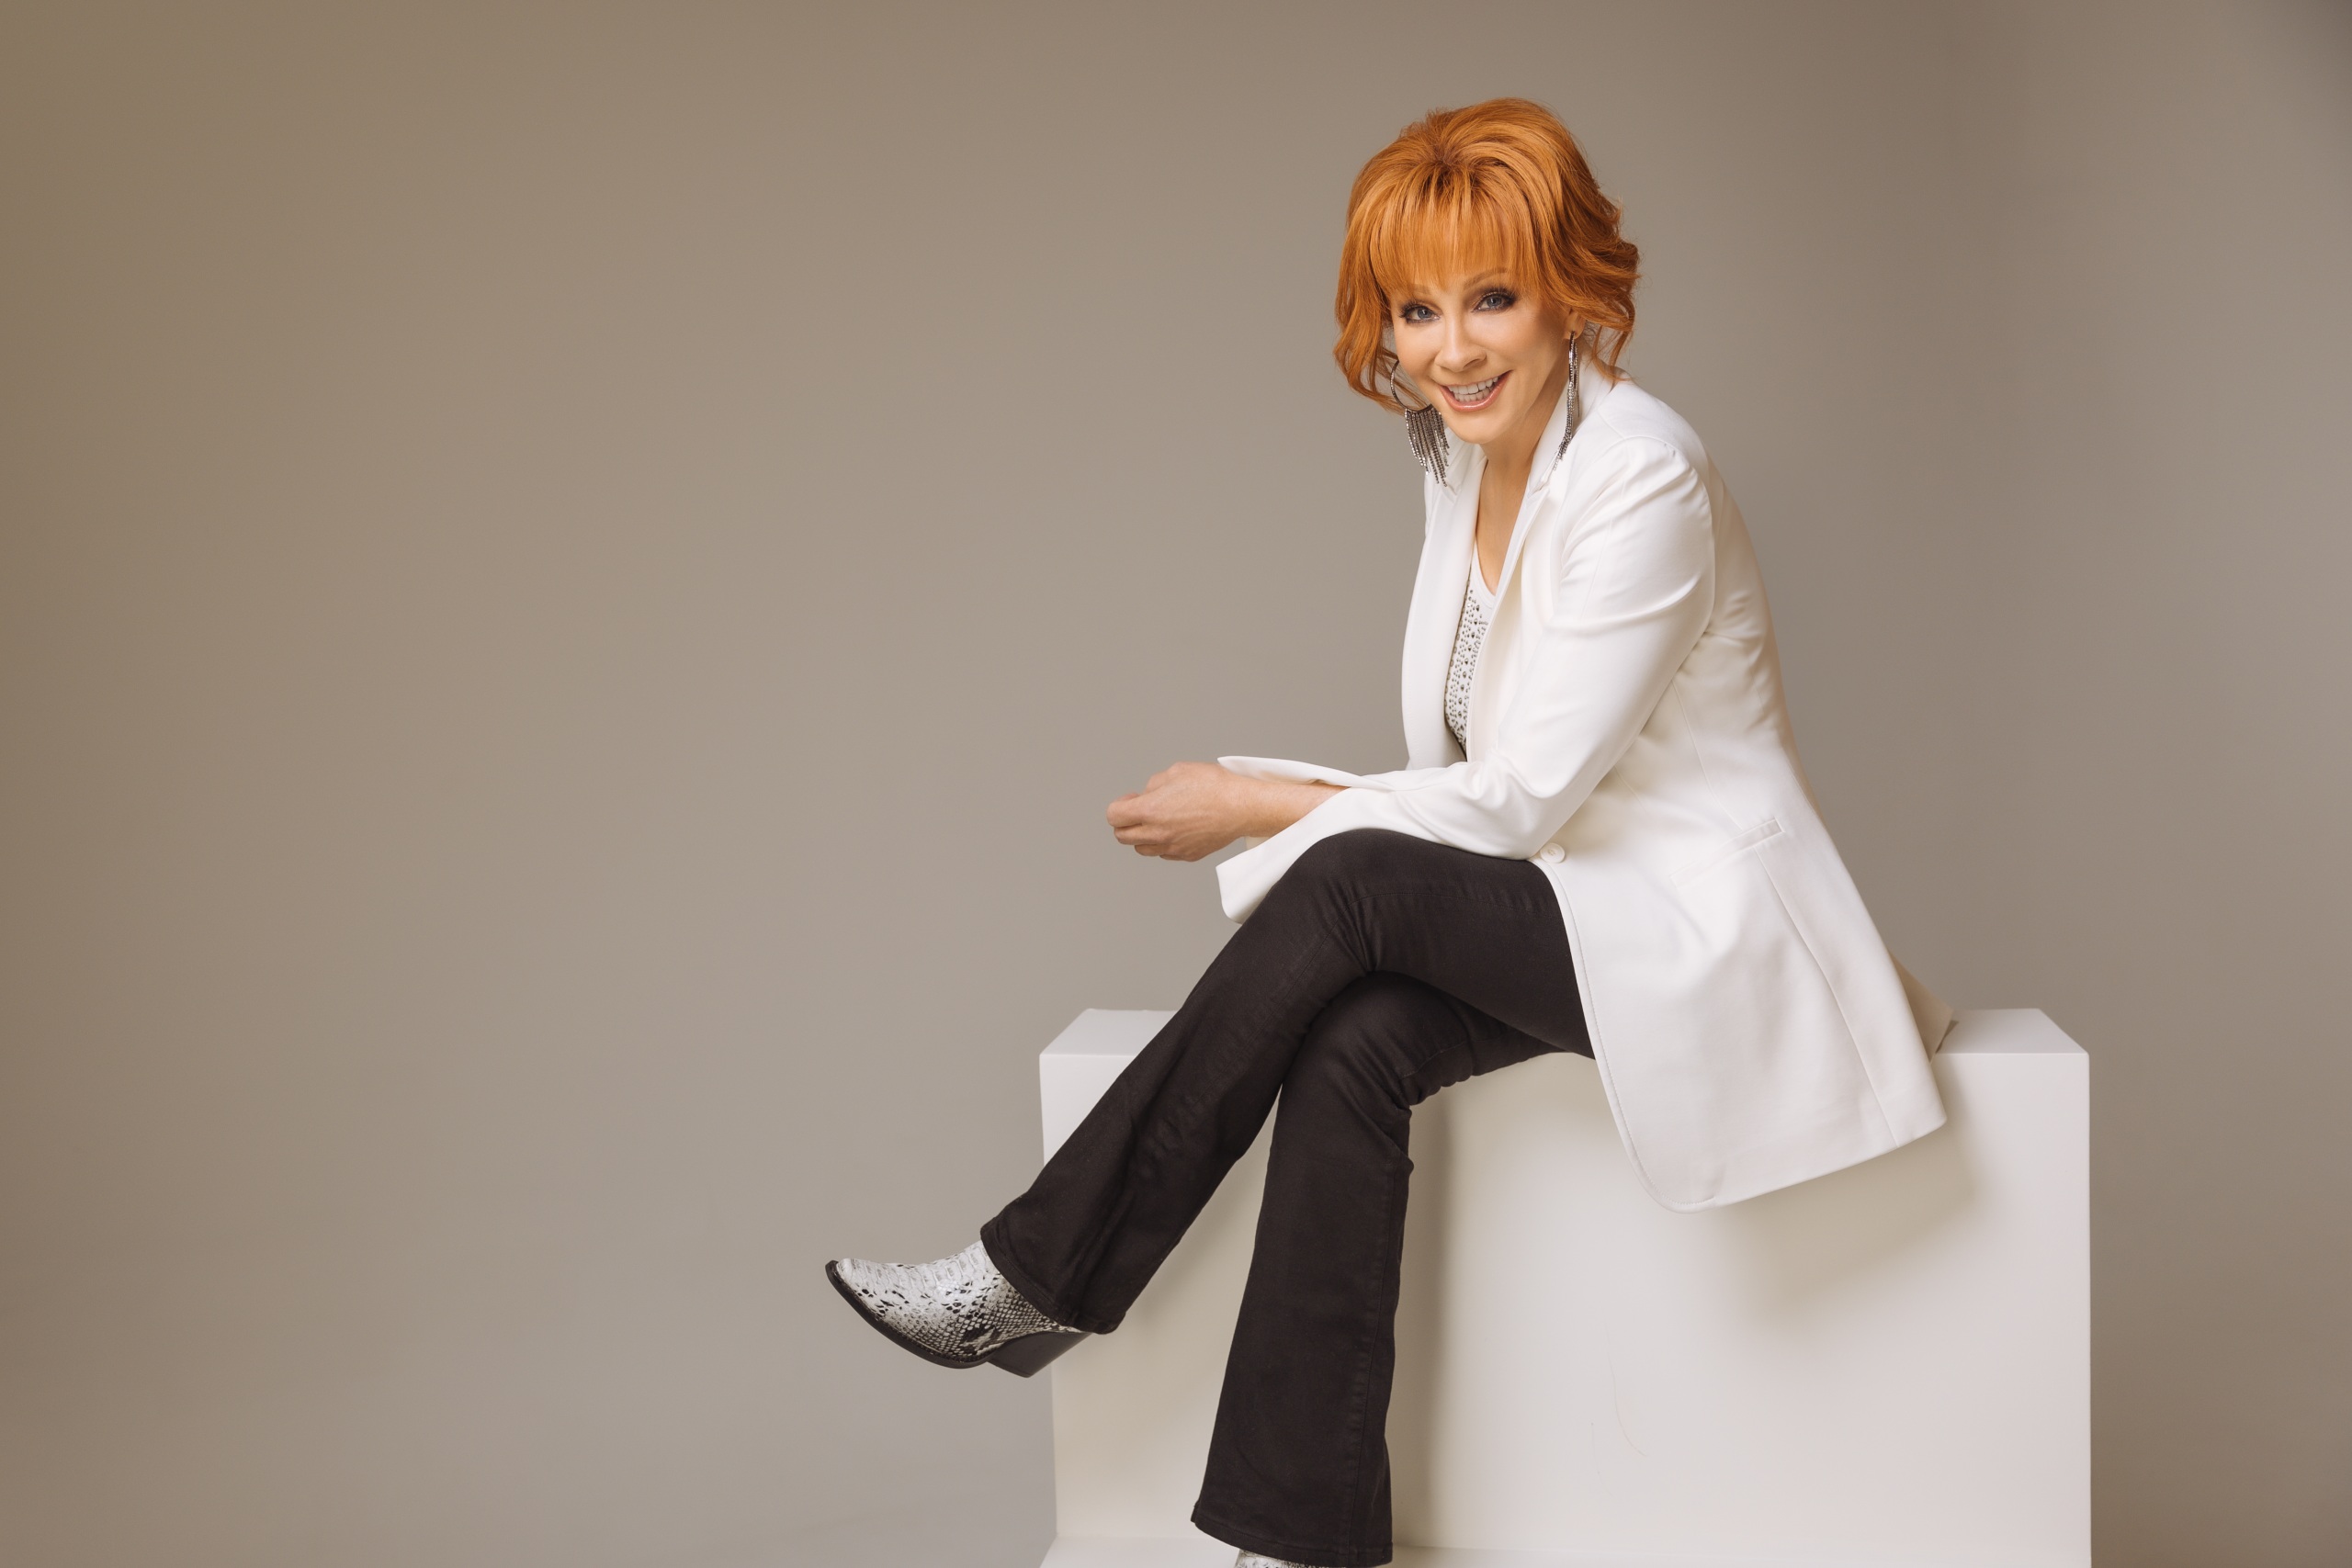 REBA McENTIRE IS HAPPY ABOUT “HAPPY’S PLACE.”